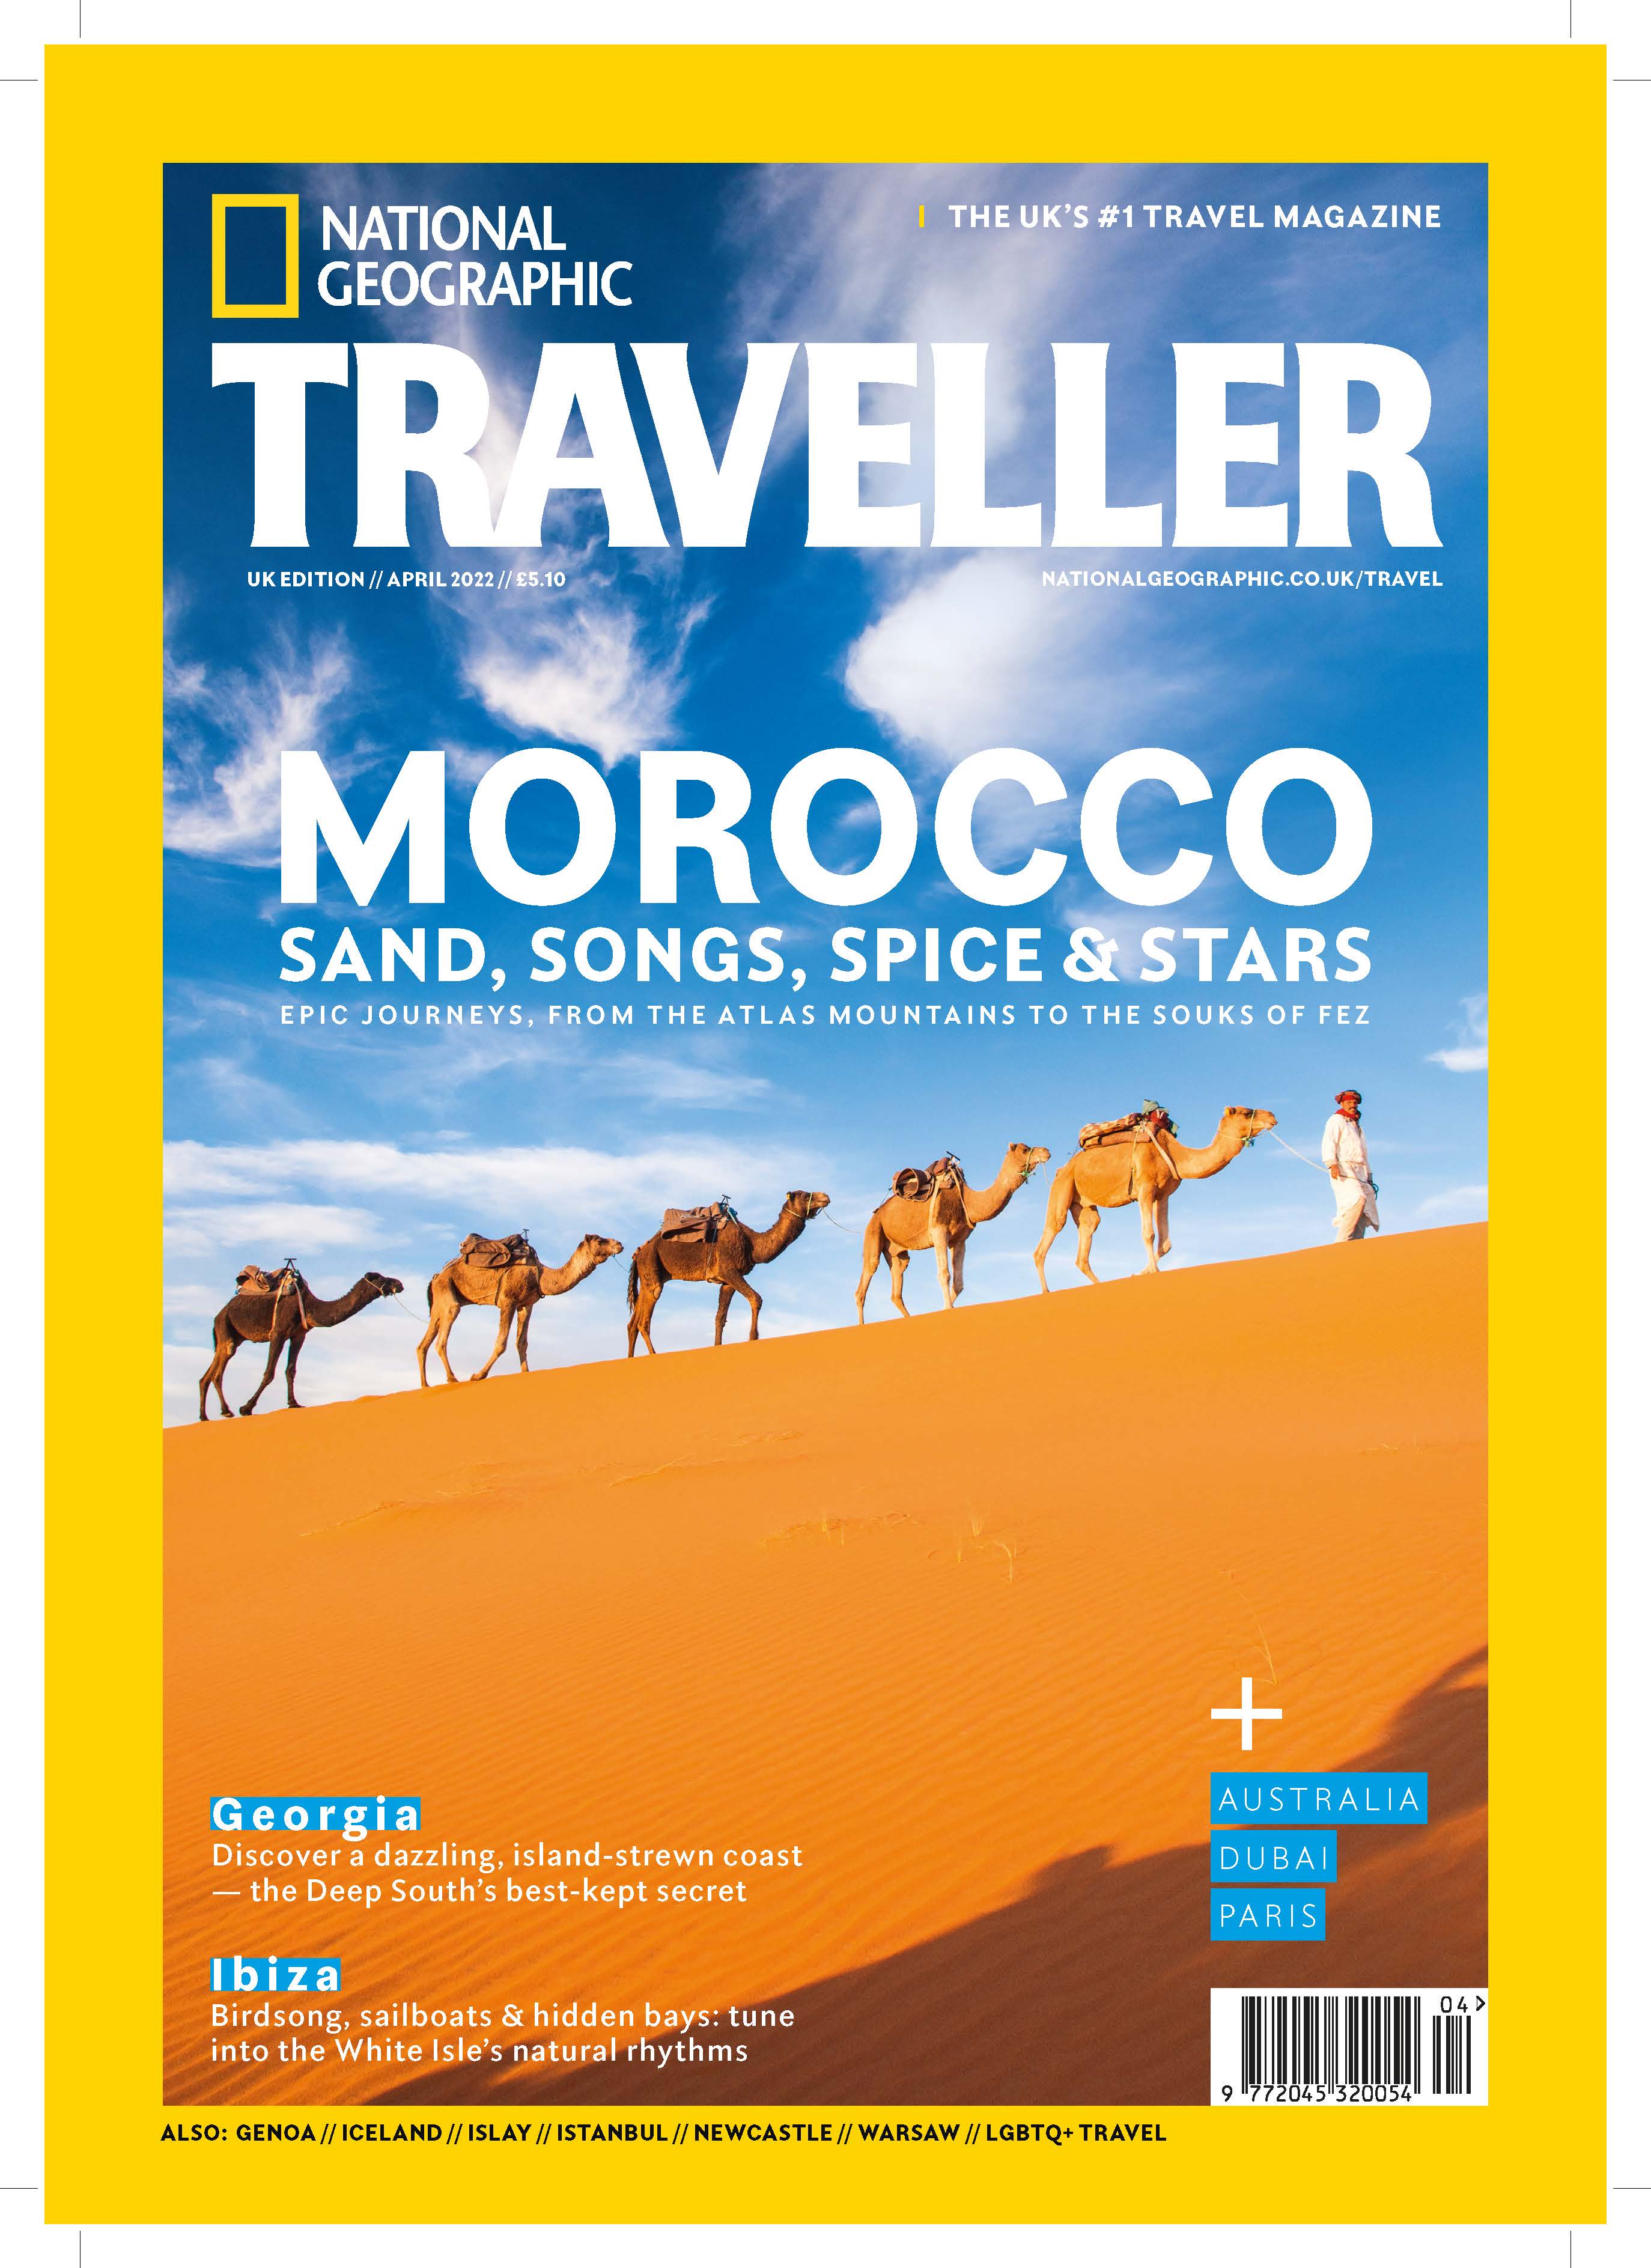 National Geographic Traveller (UK) April 2022 AVAILABLE ON NEWSSTANDS NOW